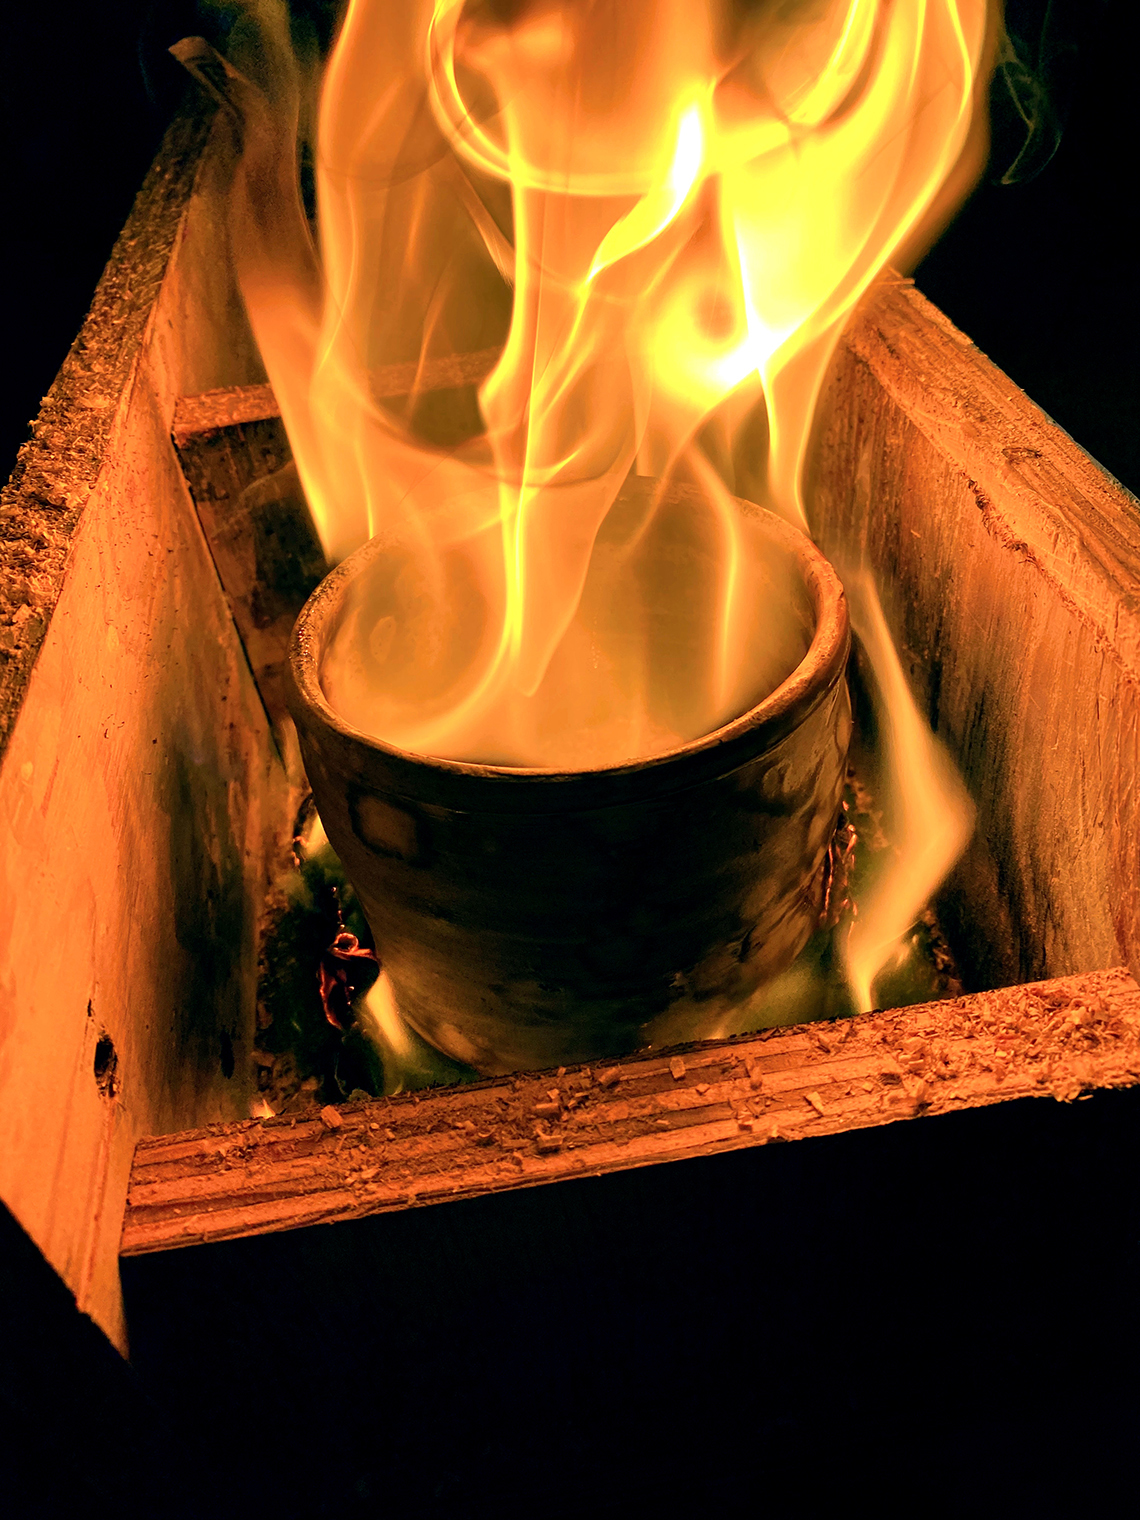 A ceramic bowl being fired using the raku technique